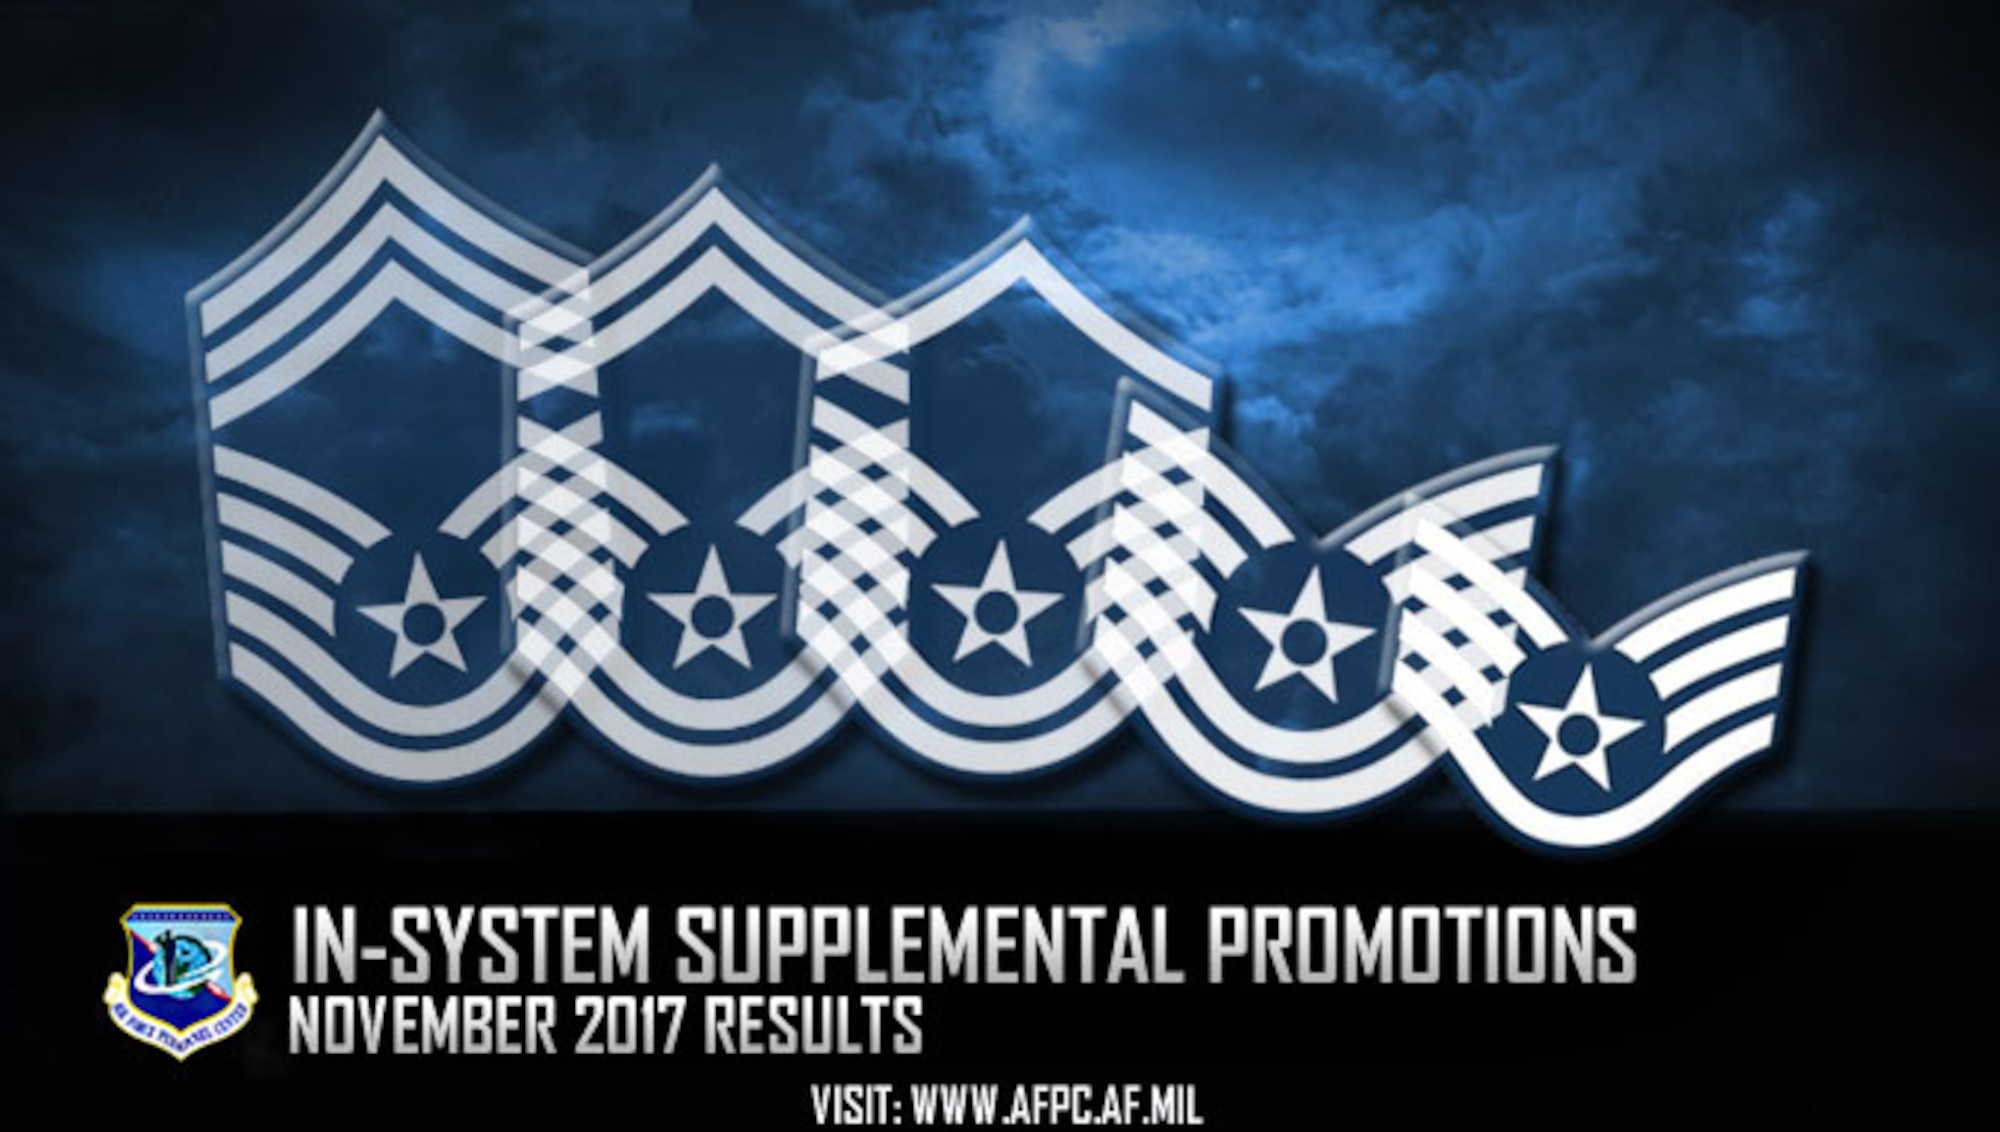 In-system supplemental promotions; November 2017 results